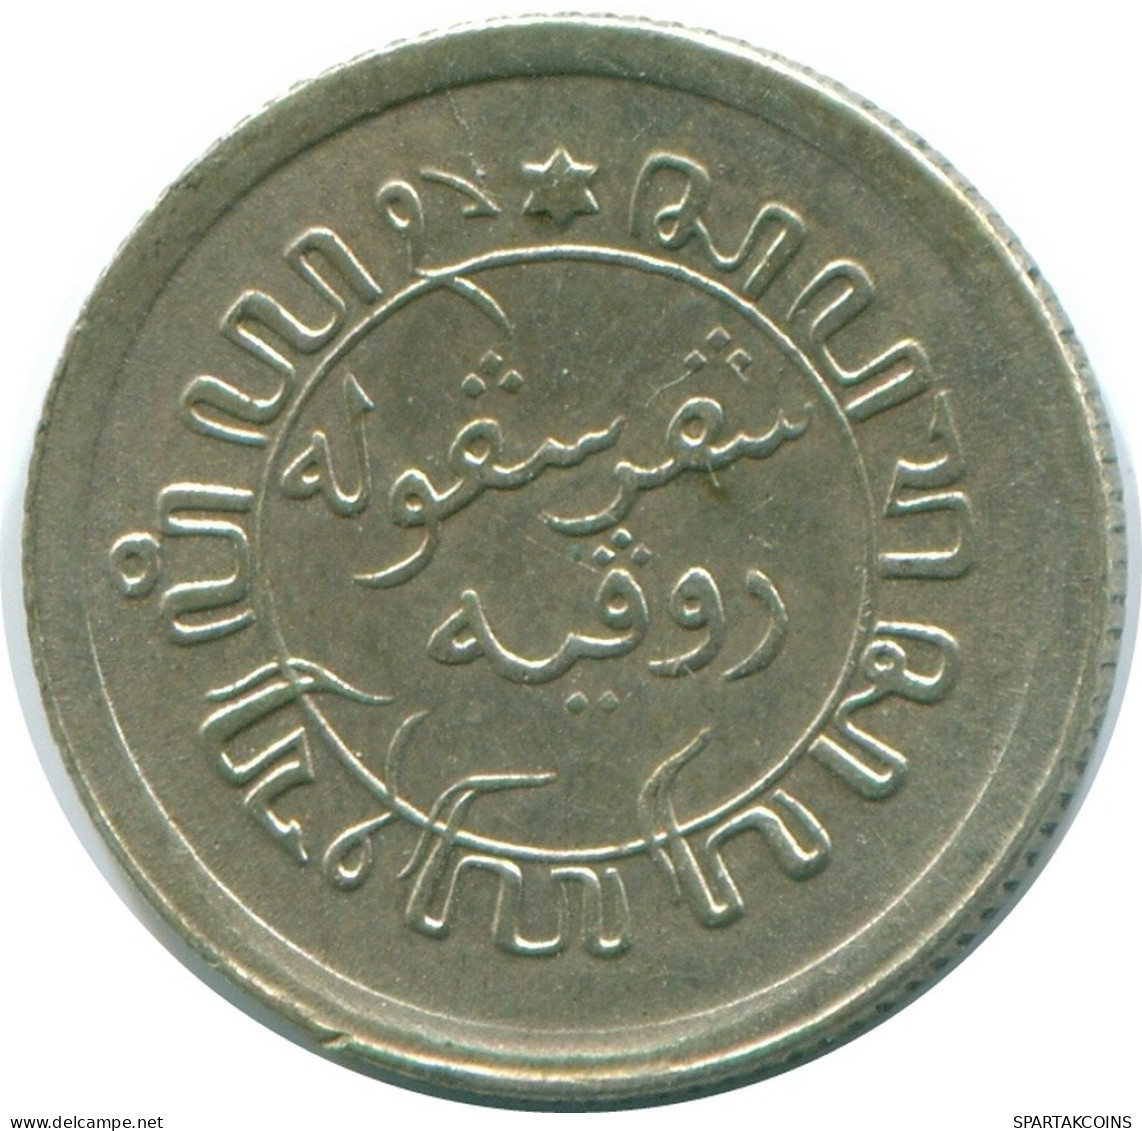 1/10 GULDEN 1920 NETHERLANDS EAST INDIES SILVER Colonial Coin #NL13394.3.U.A - Dutch East Indies